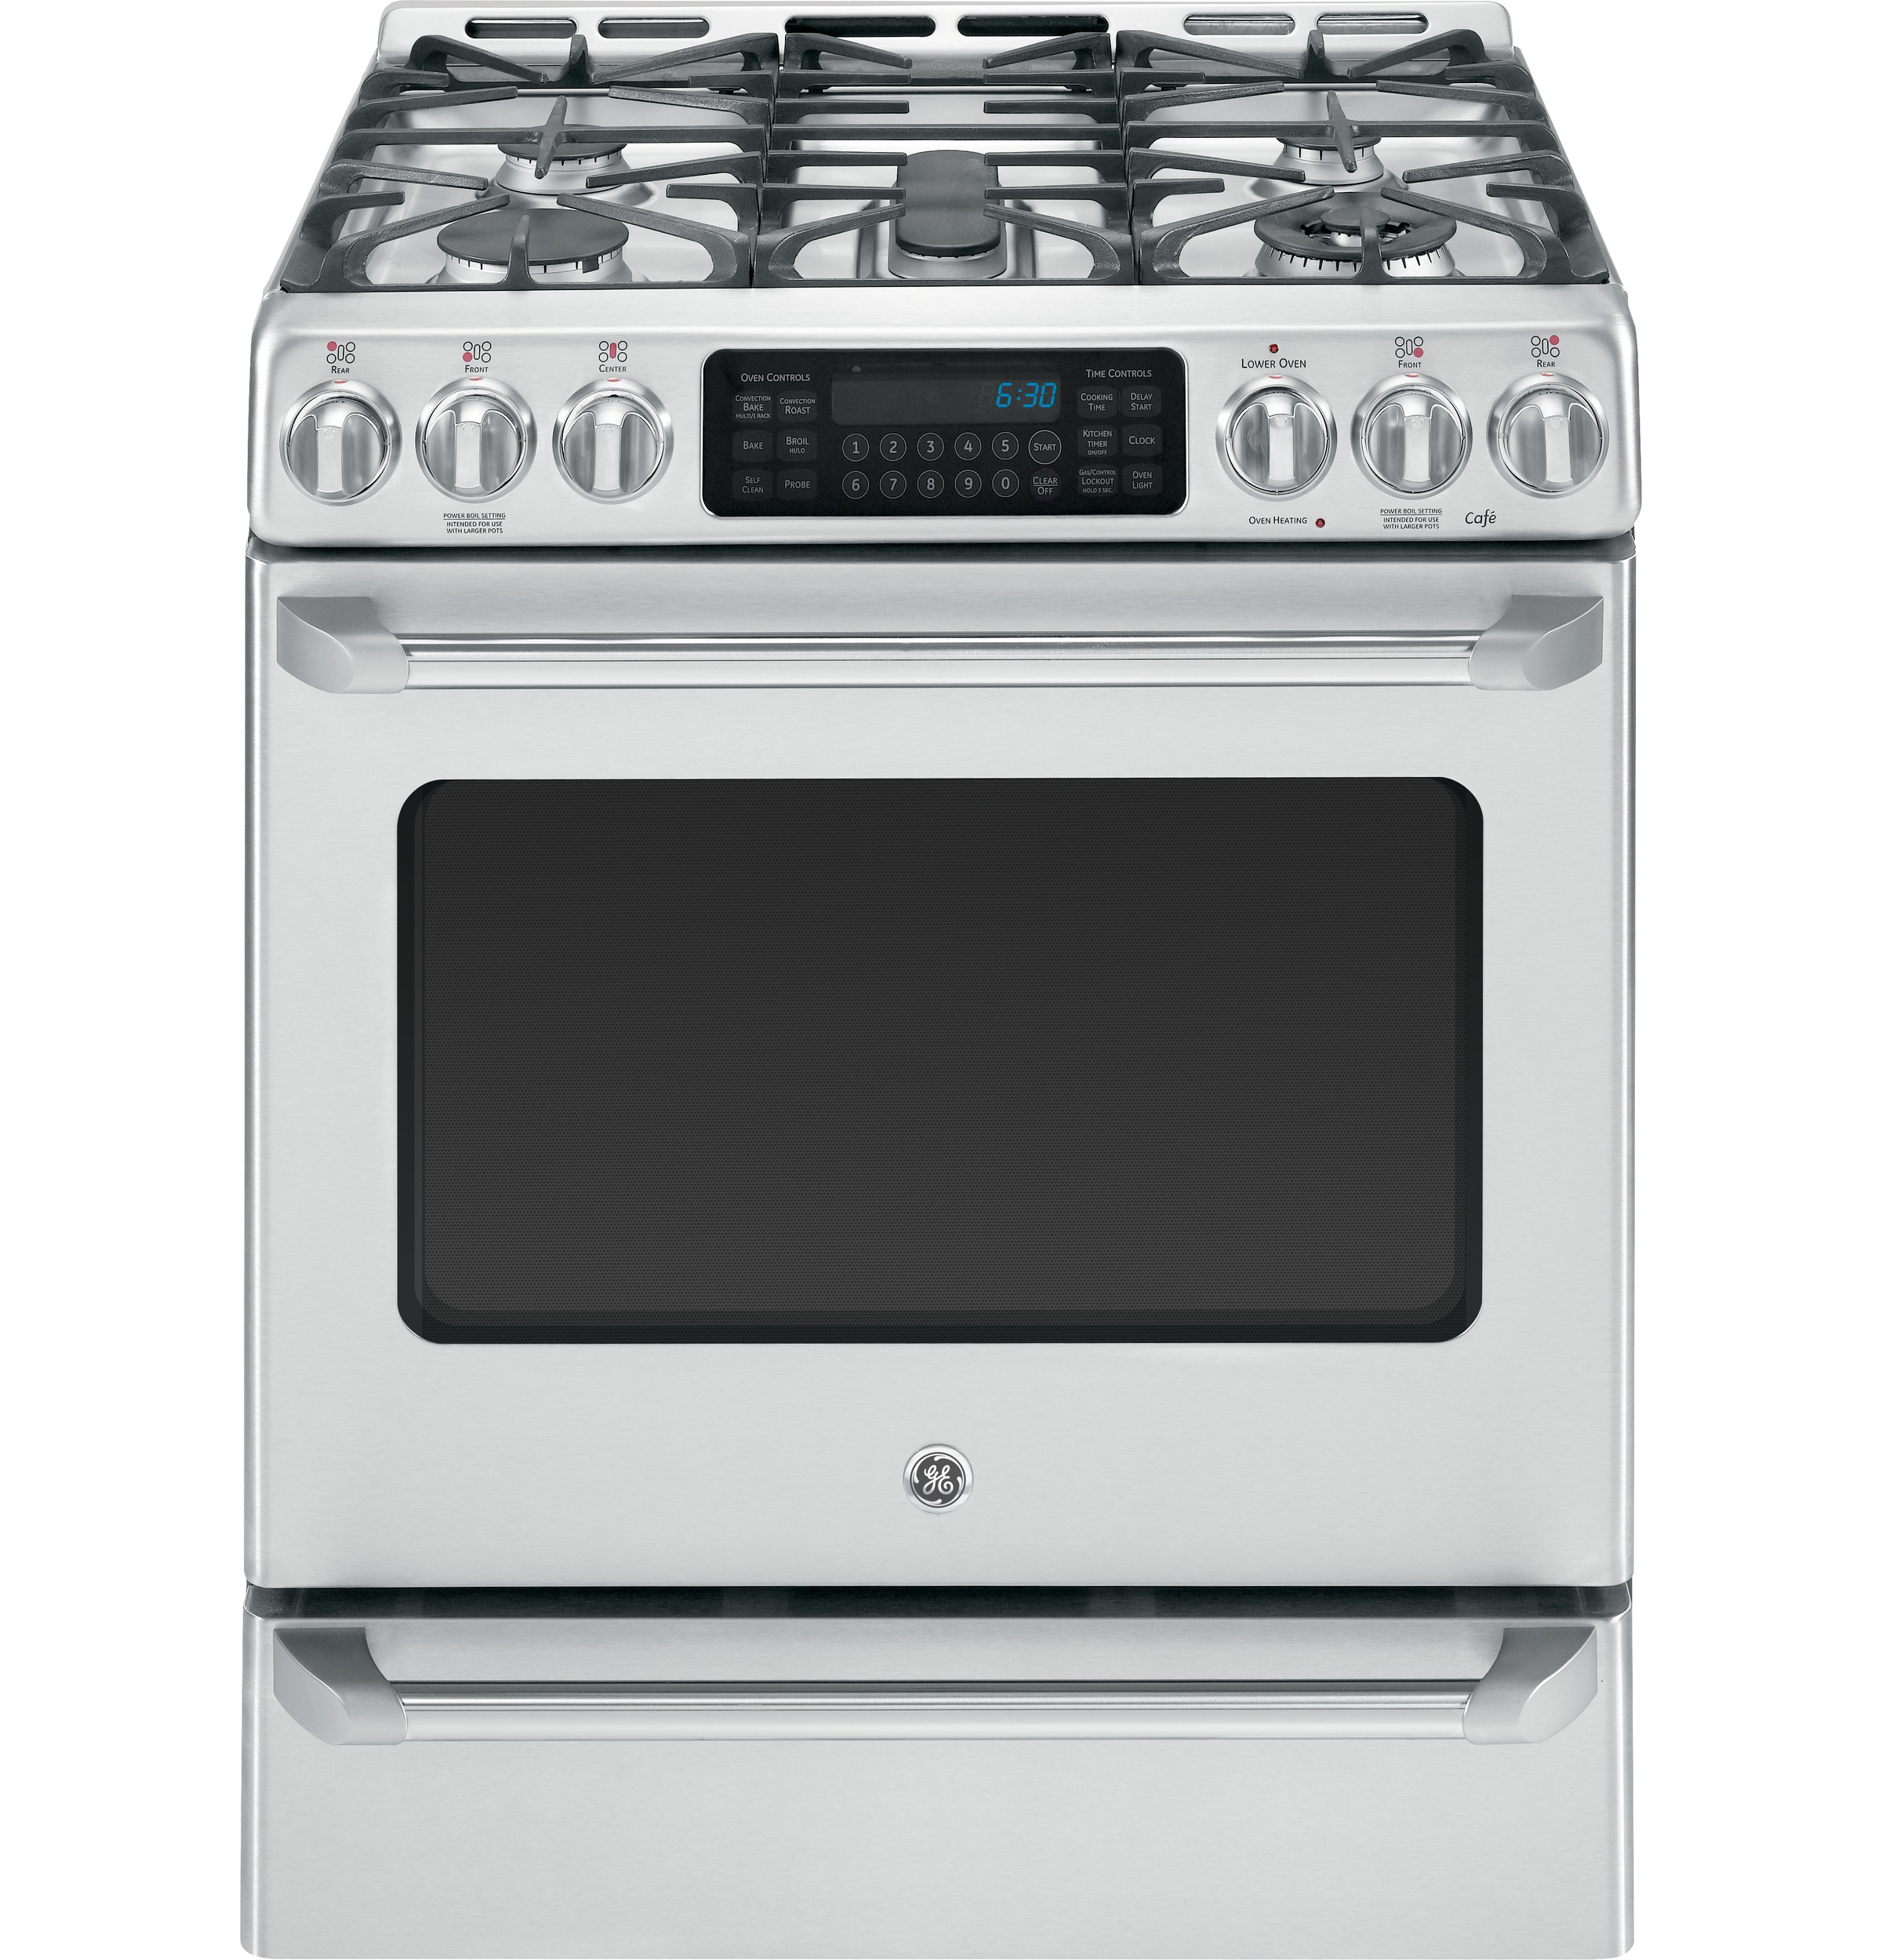 GE Cafe CGS985SETSS 6.4 cu. ft. Gas Range with SelfCleaning Convection